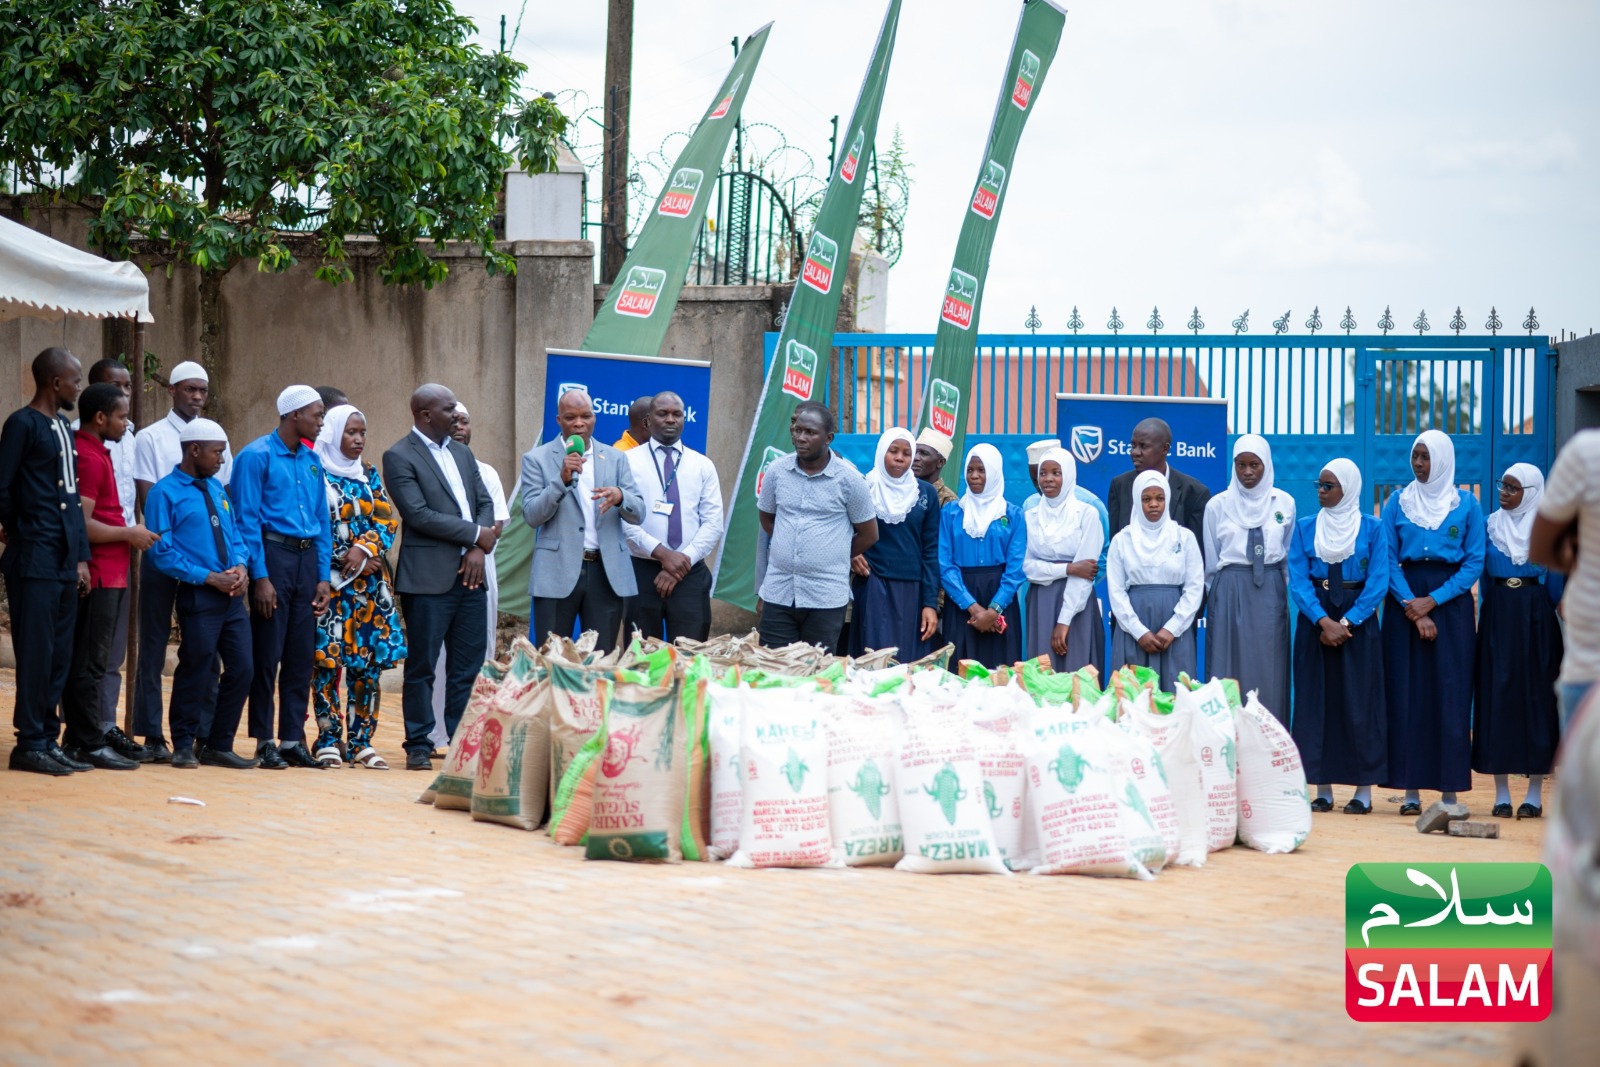 Featured image for Salam Charity, Stanbic Bank, Salam TV launch nationwide Iftar program for schools